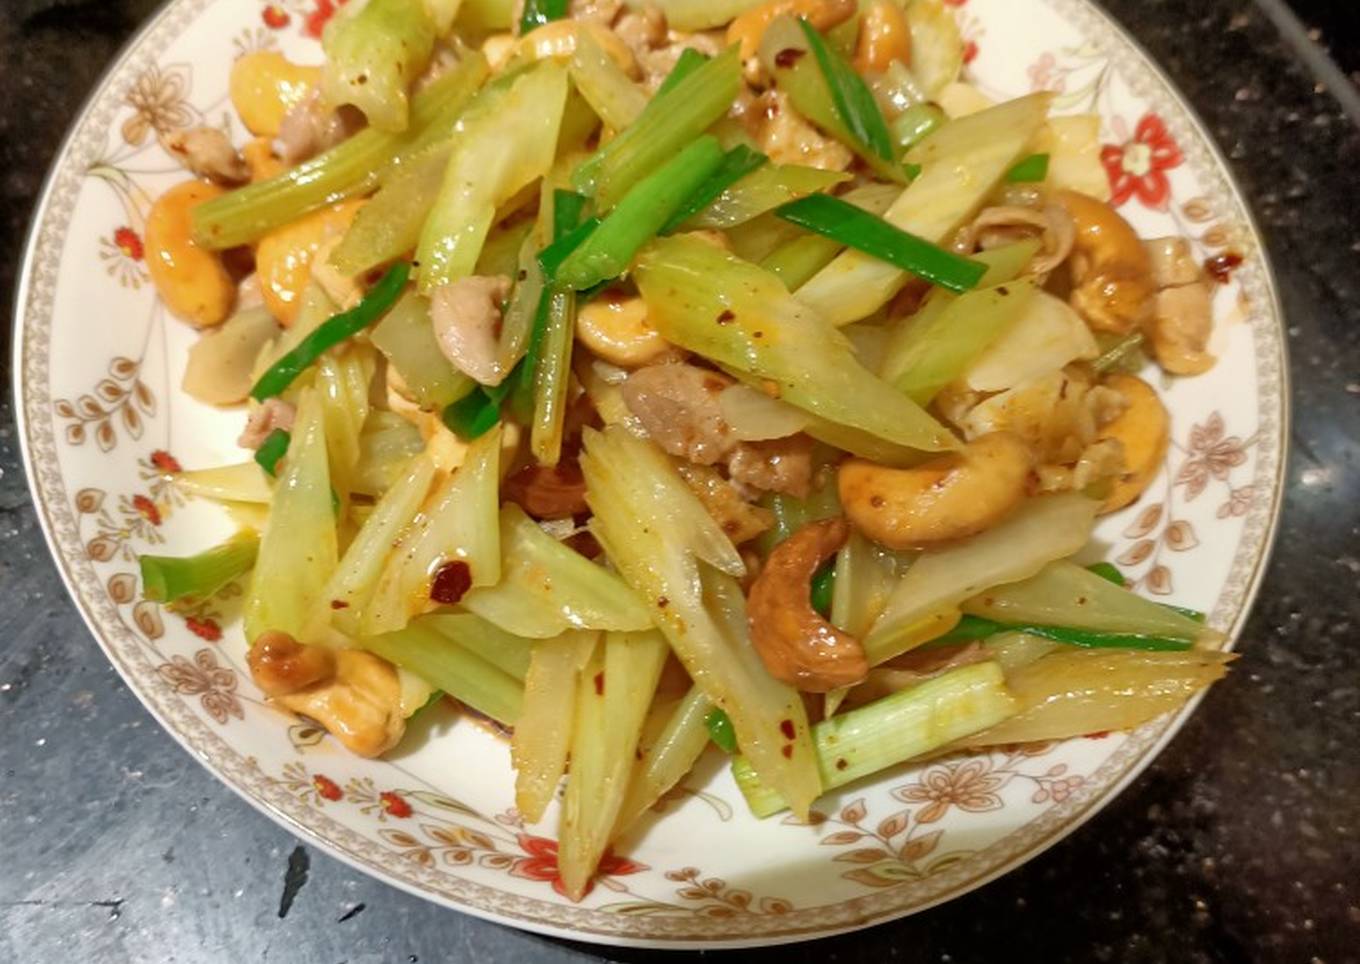 sauteed big celery with chicken meat hongkong style